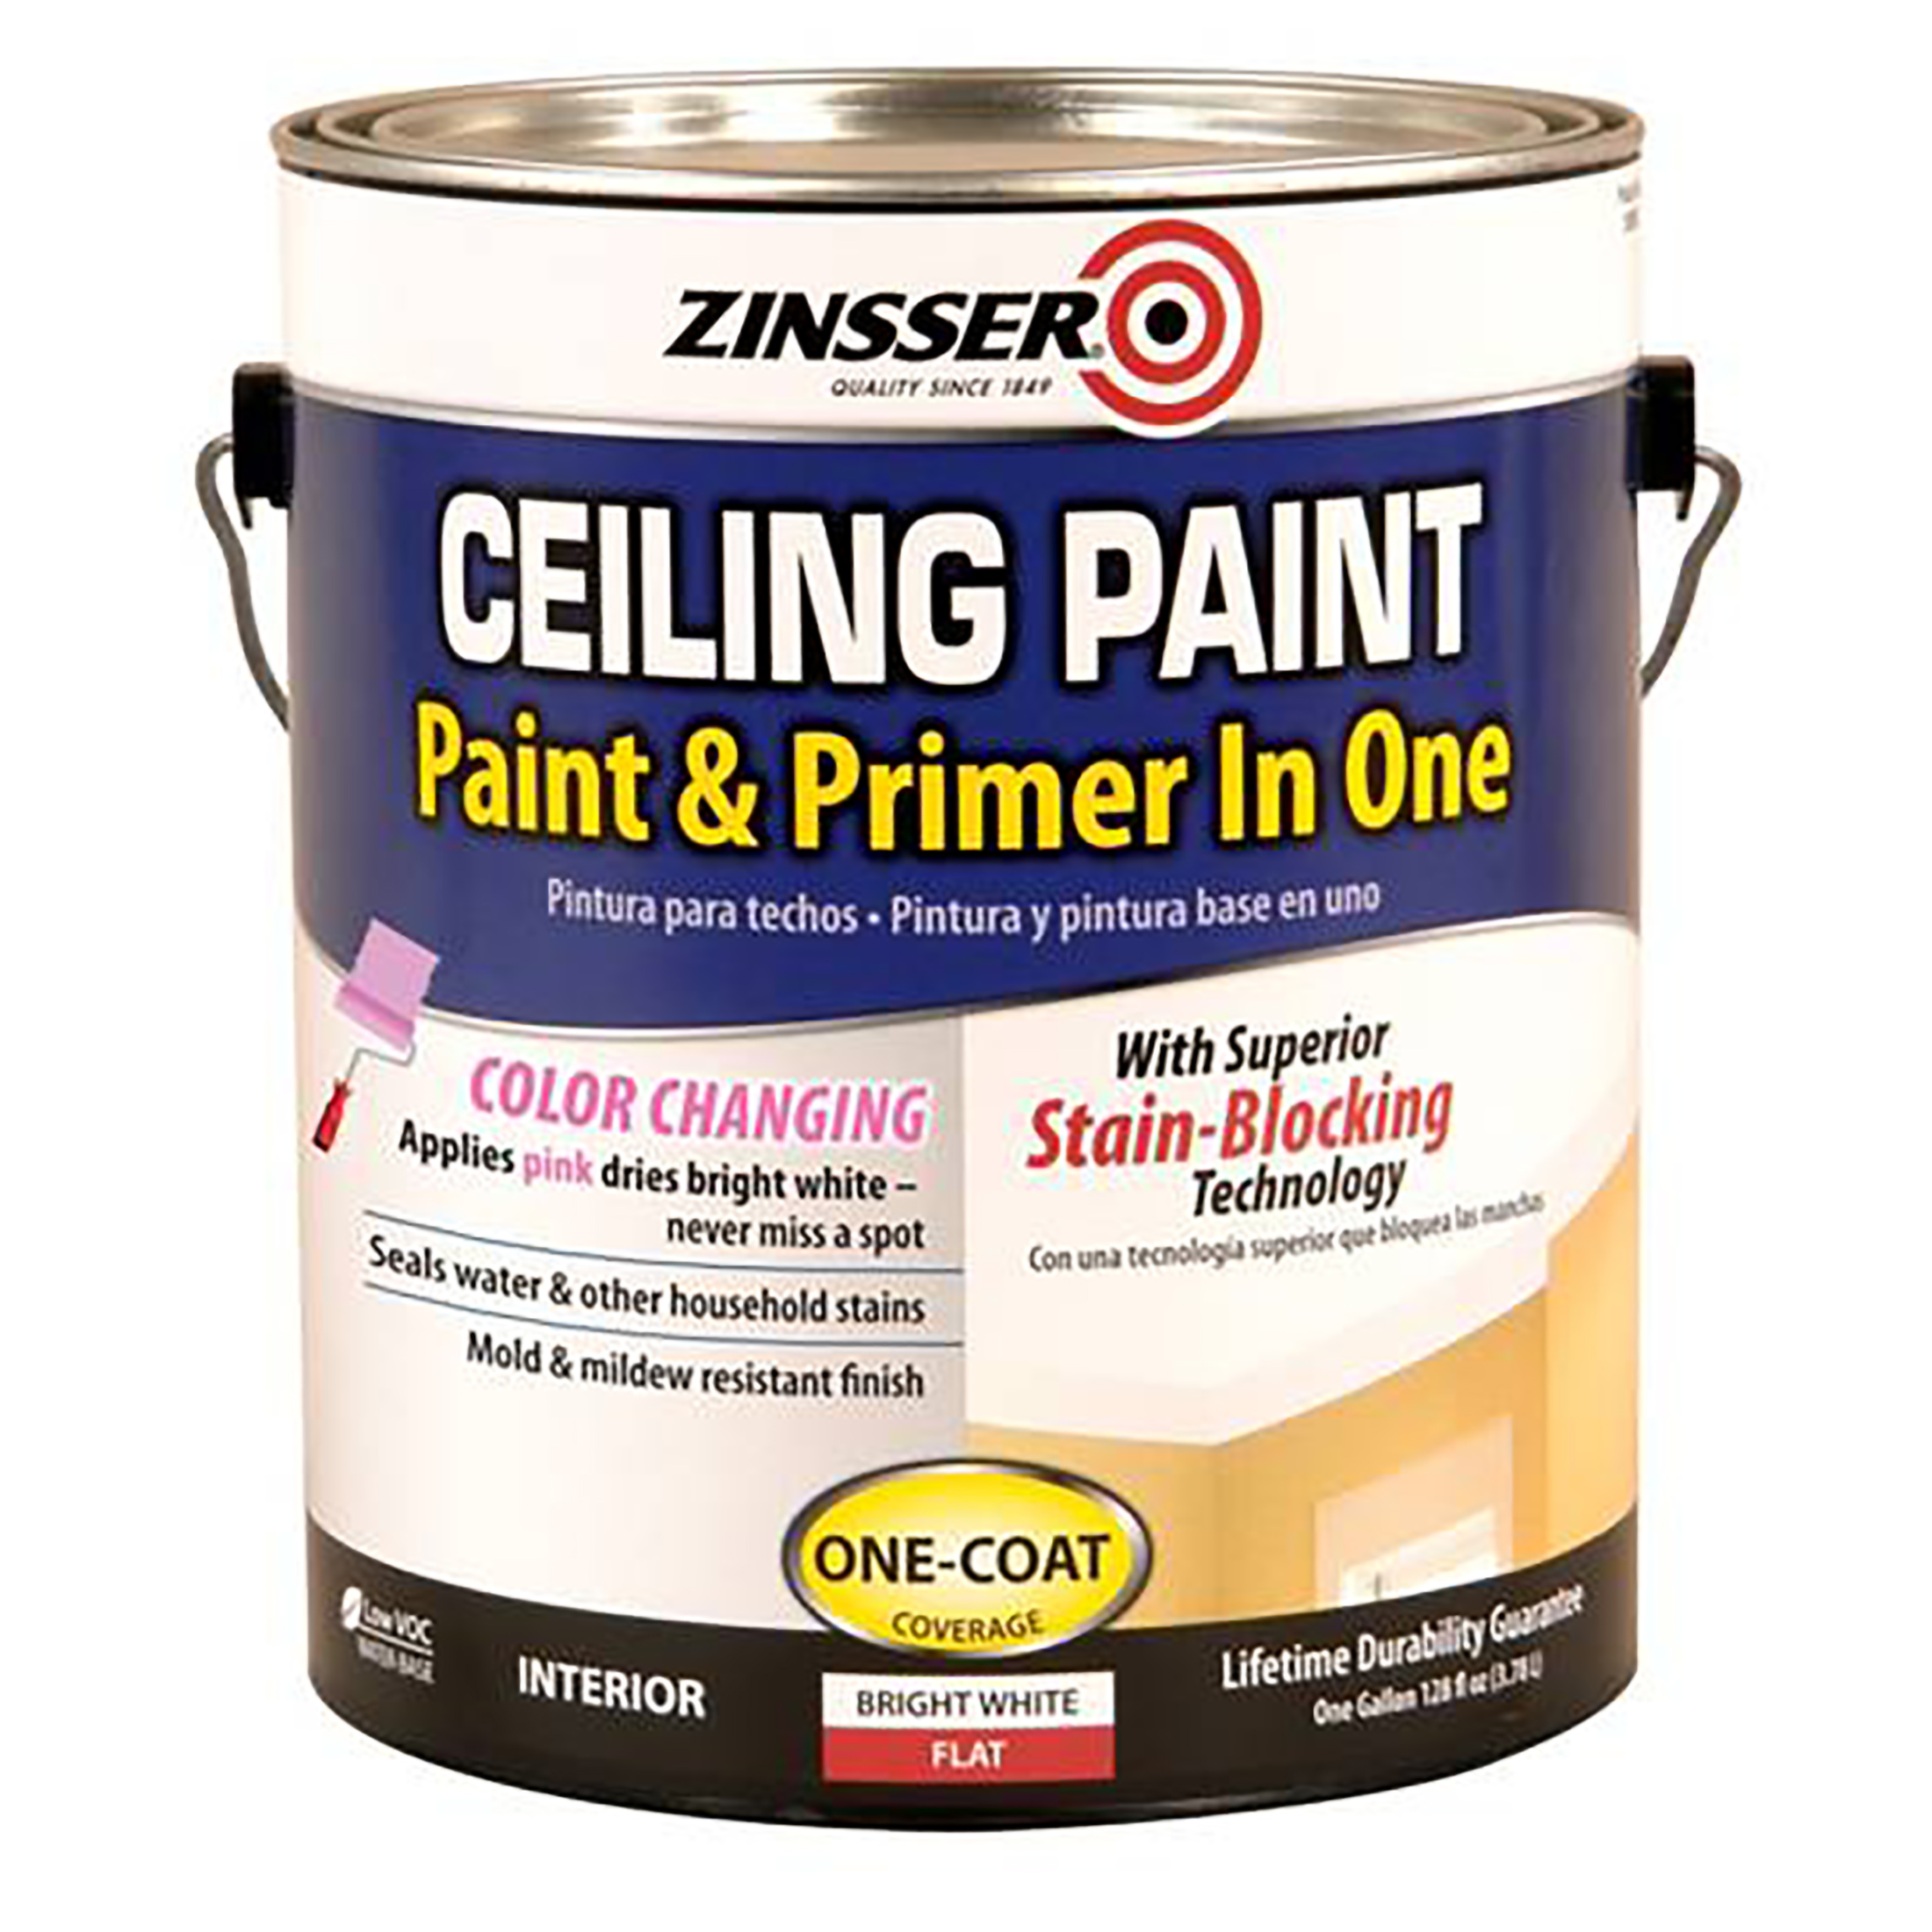 White, Zinsser Flat Ceiling Paint and Primer- Gallon, 2 Pack - image 3 of 6